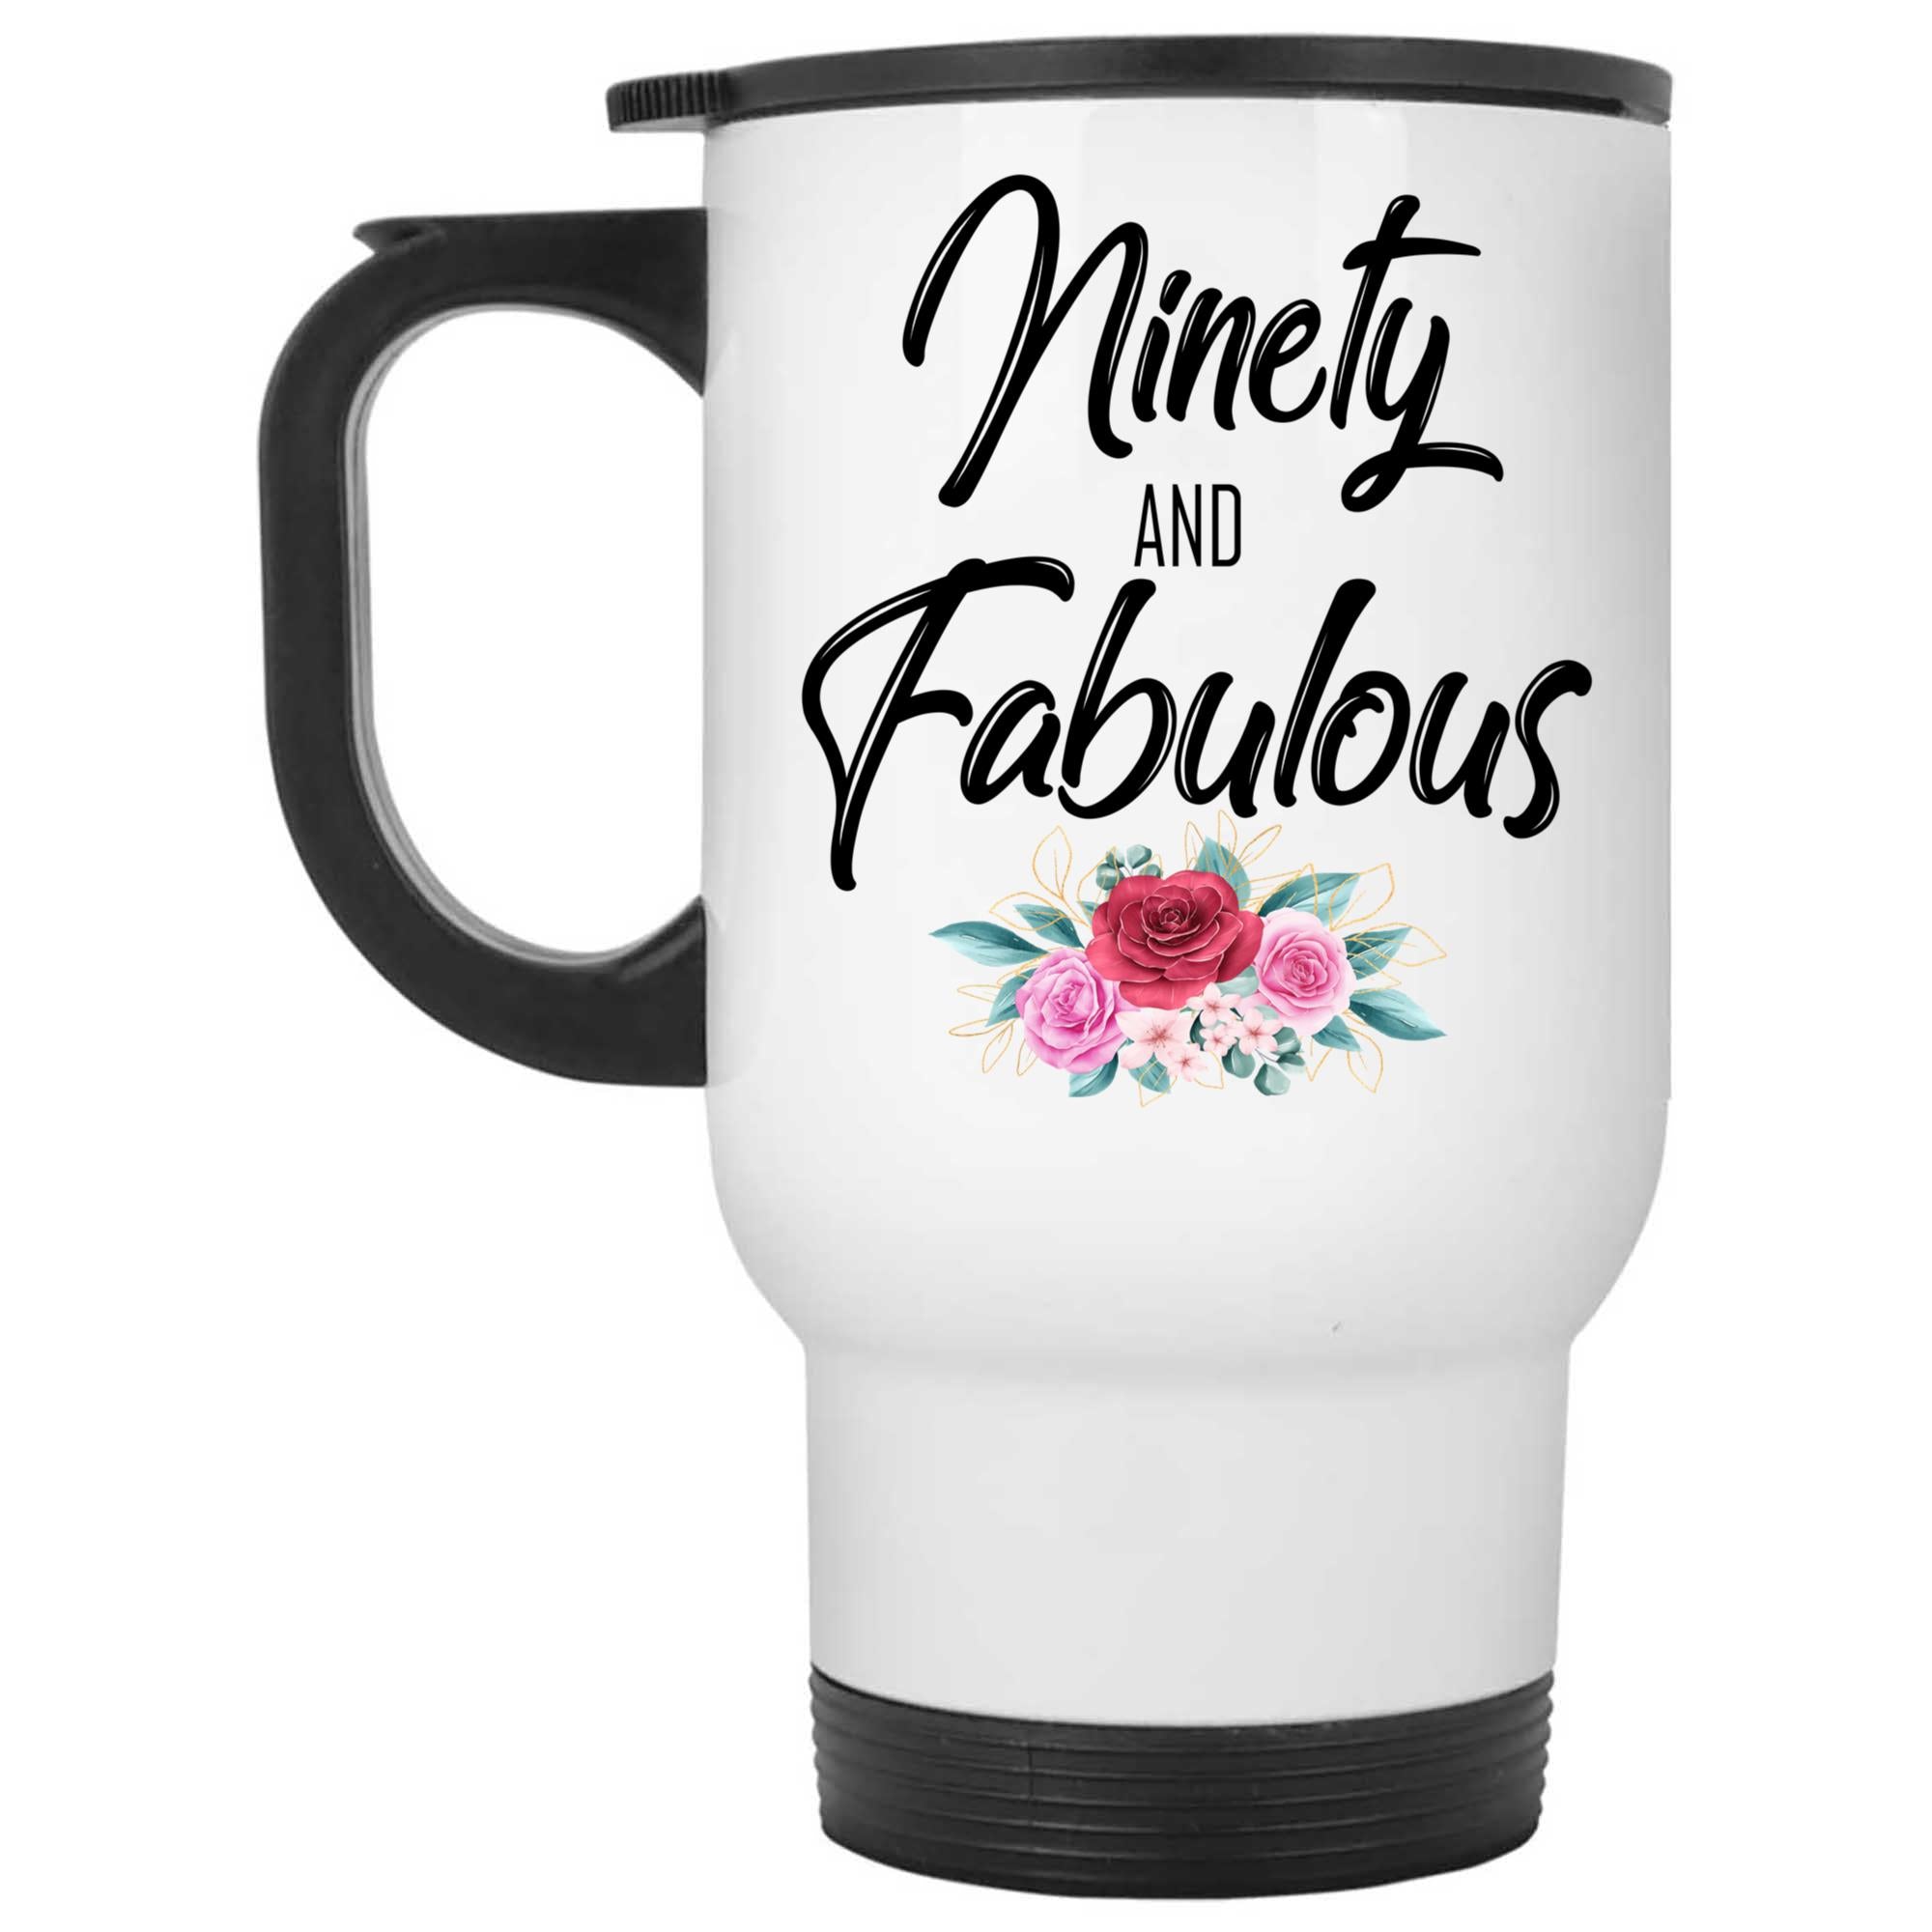 Skitongifts Funny Ceramic Coffee Mug For Birthday, Mother's Day, Father's Day, Christmas NH181221-Her 90 Year Old - Ninety And Fabulous Ek8Um78